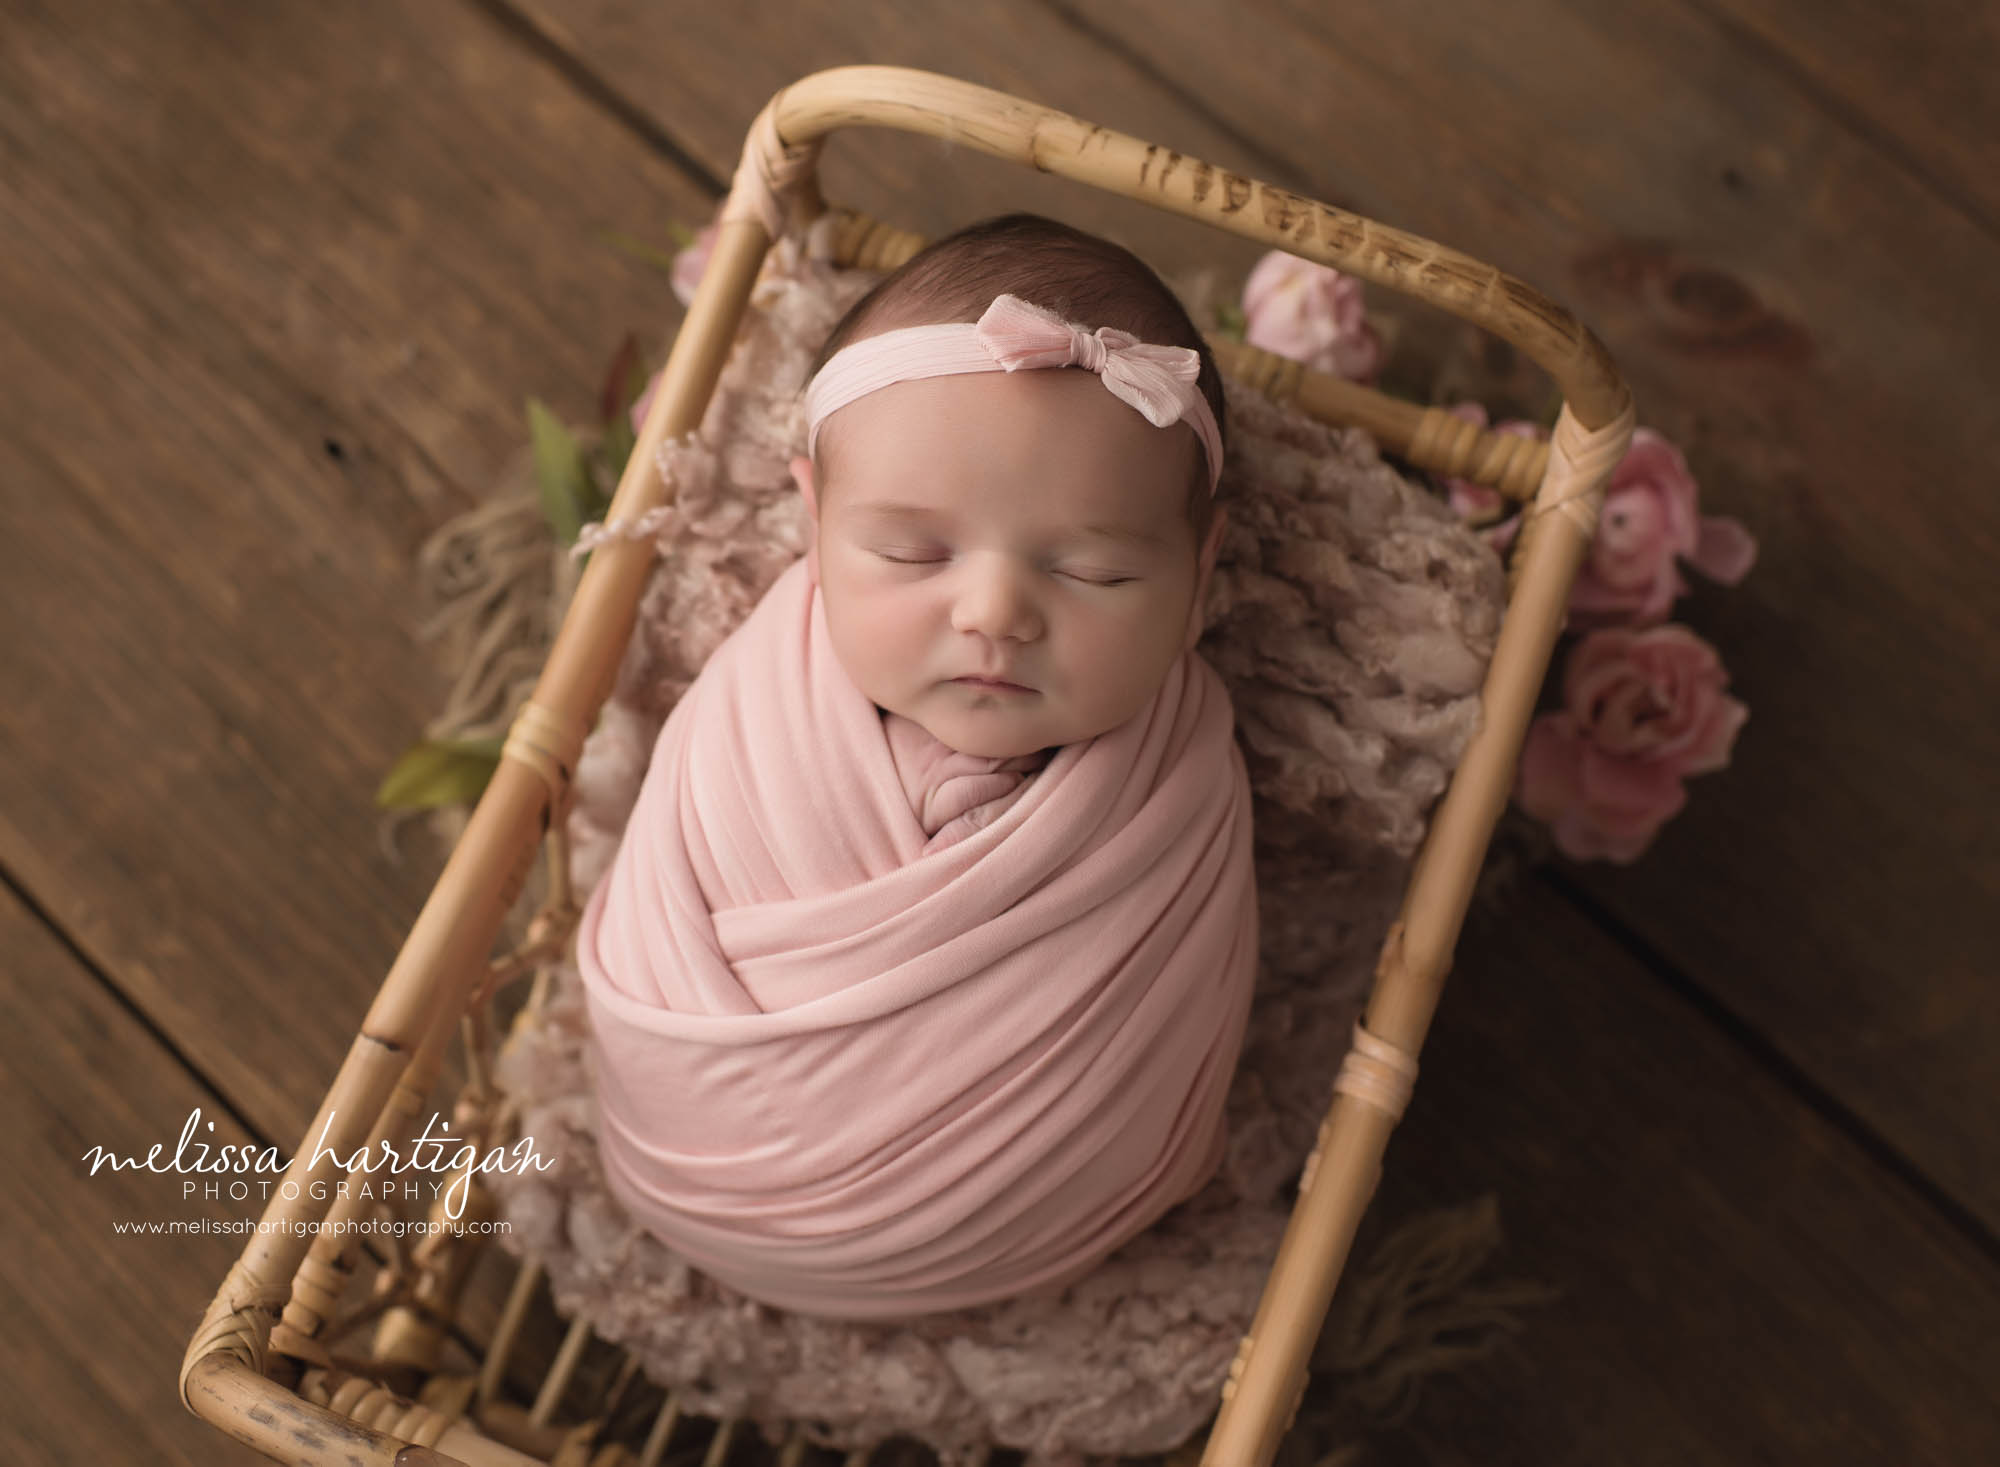 Newborn baby girl wrapped in pink wrap posed in basket with lgith pink lay and flowers Rocky Hill Newborn Photography